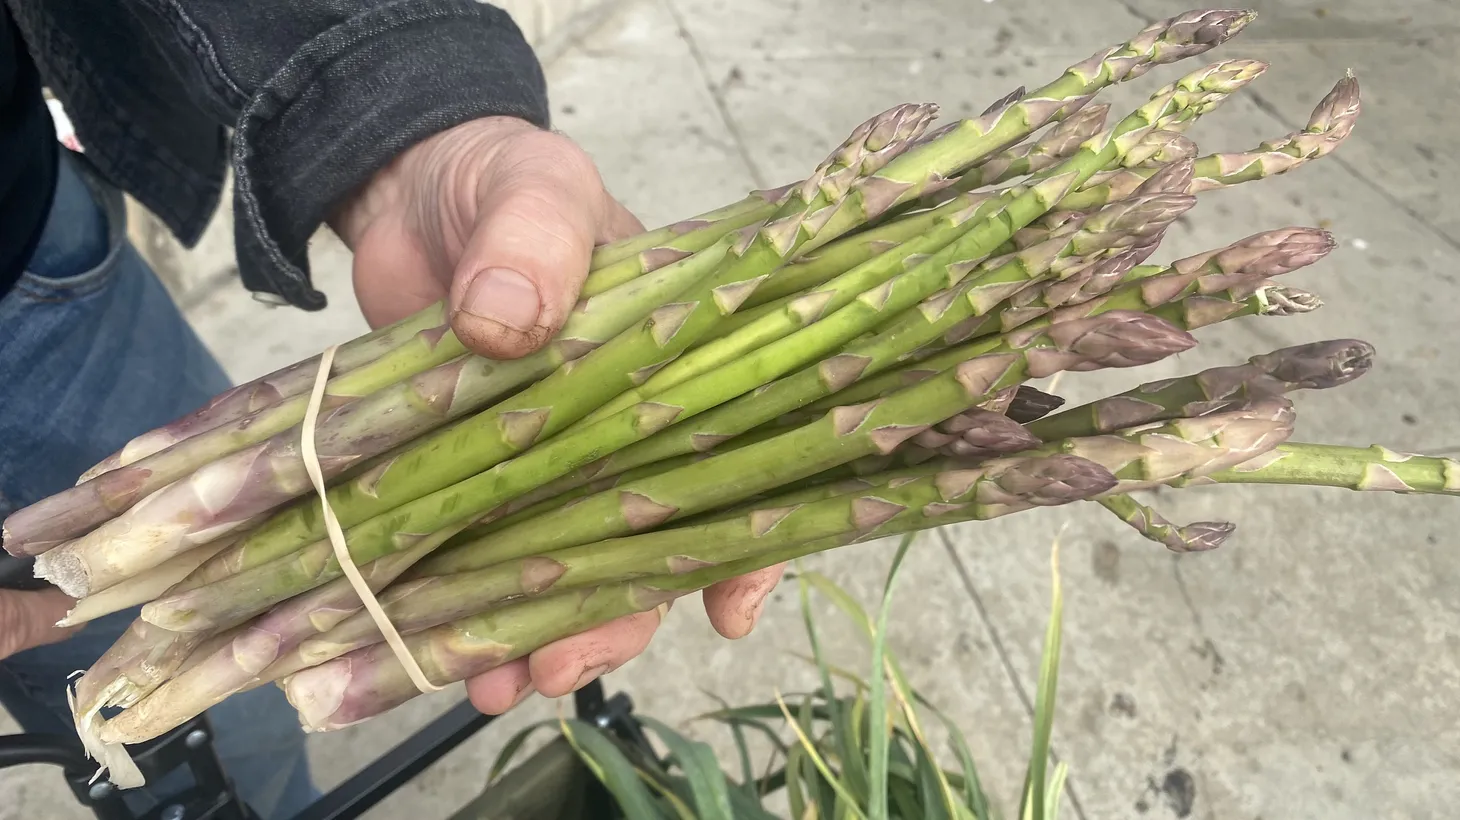 Chef David Tanis notes to look for smooth and shiny stalks with tight tips when shopping for asparagus.